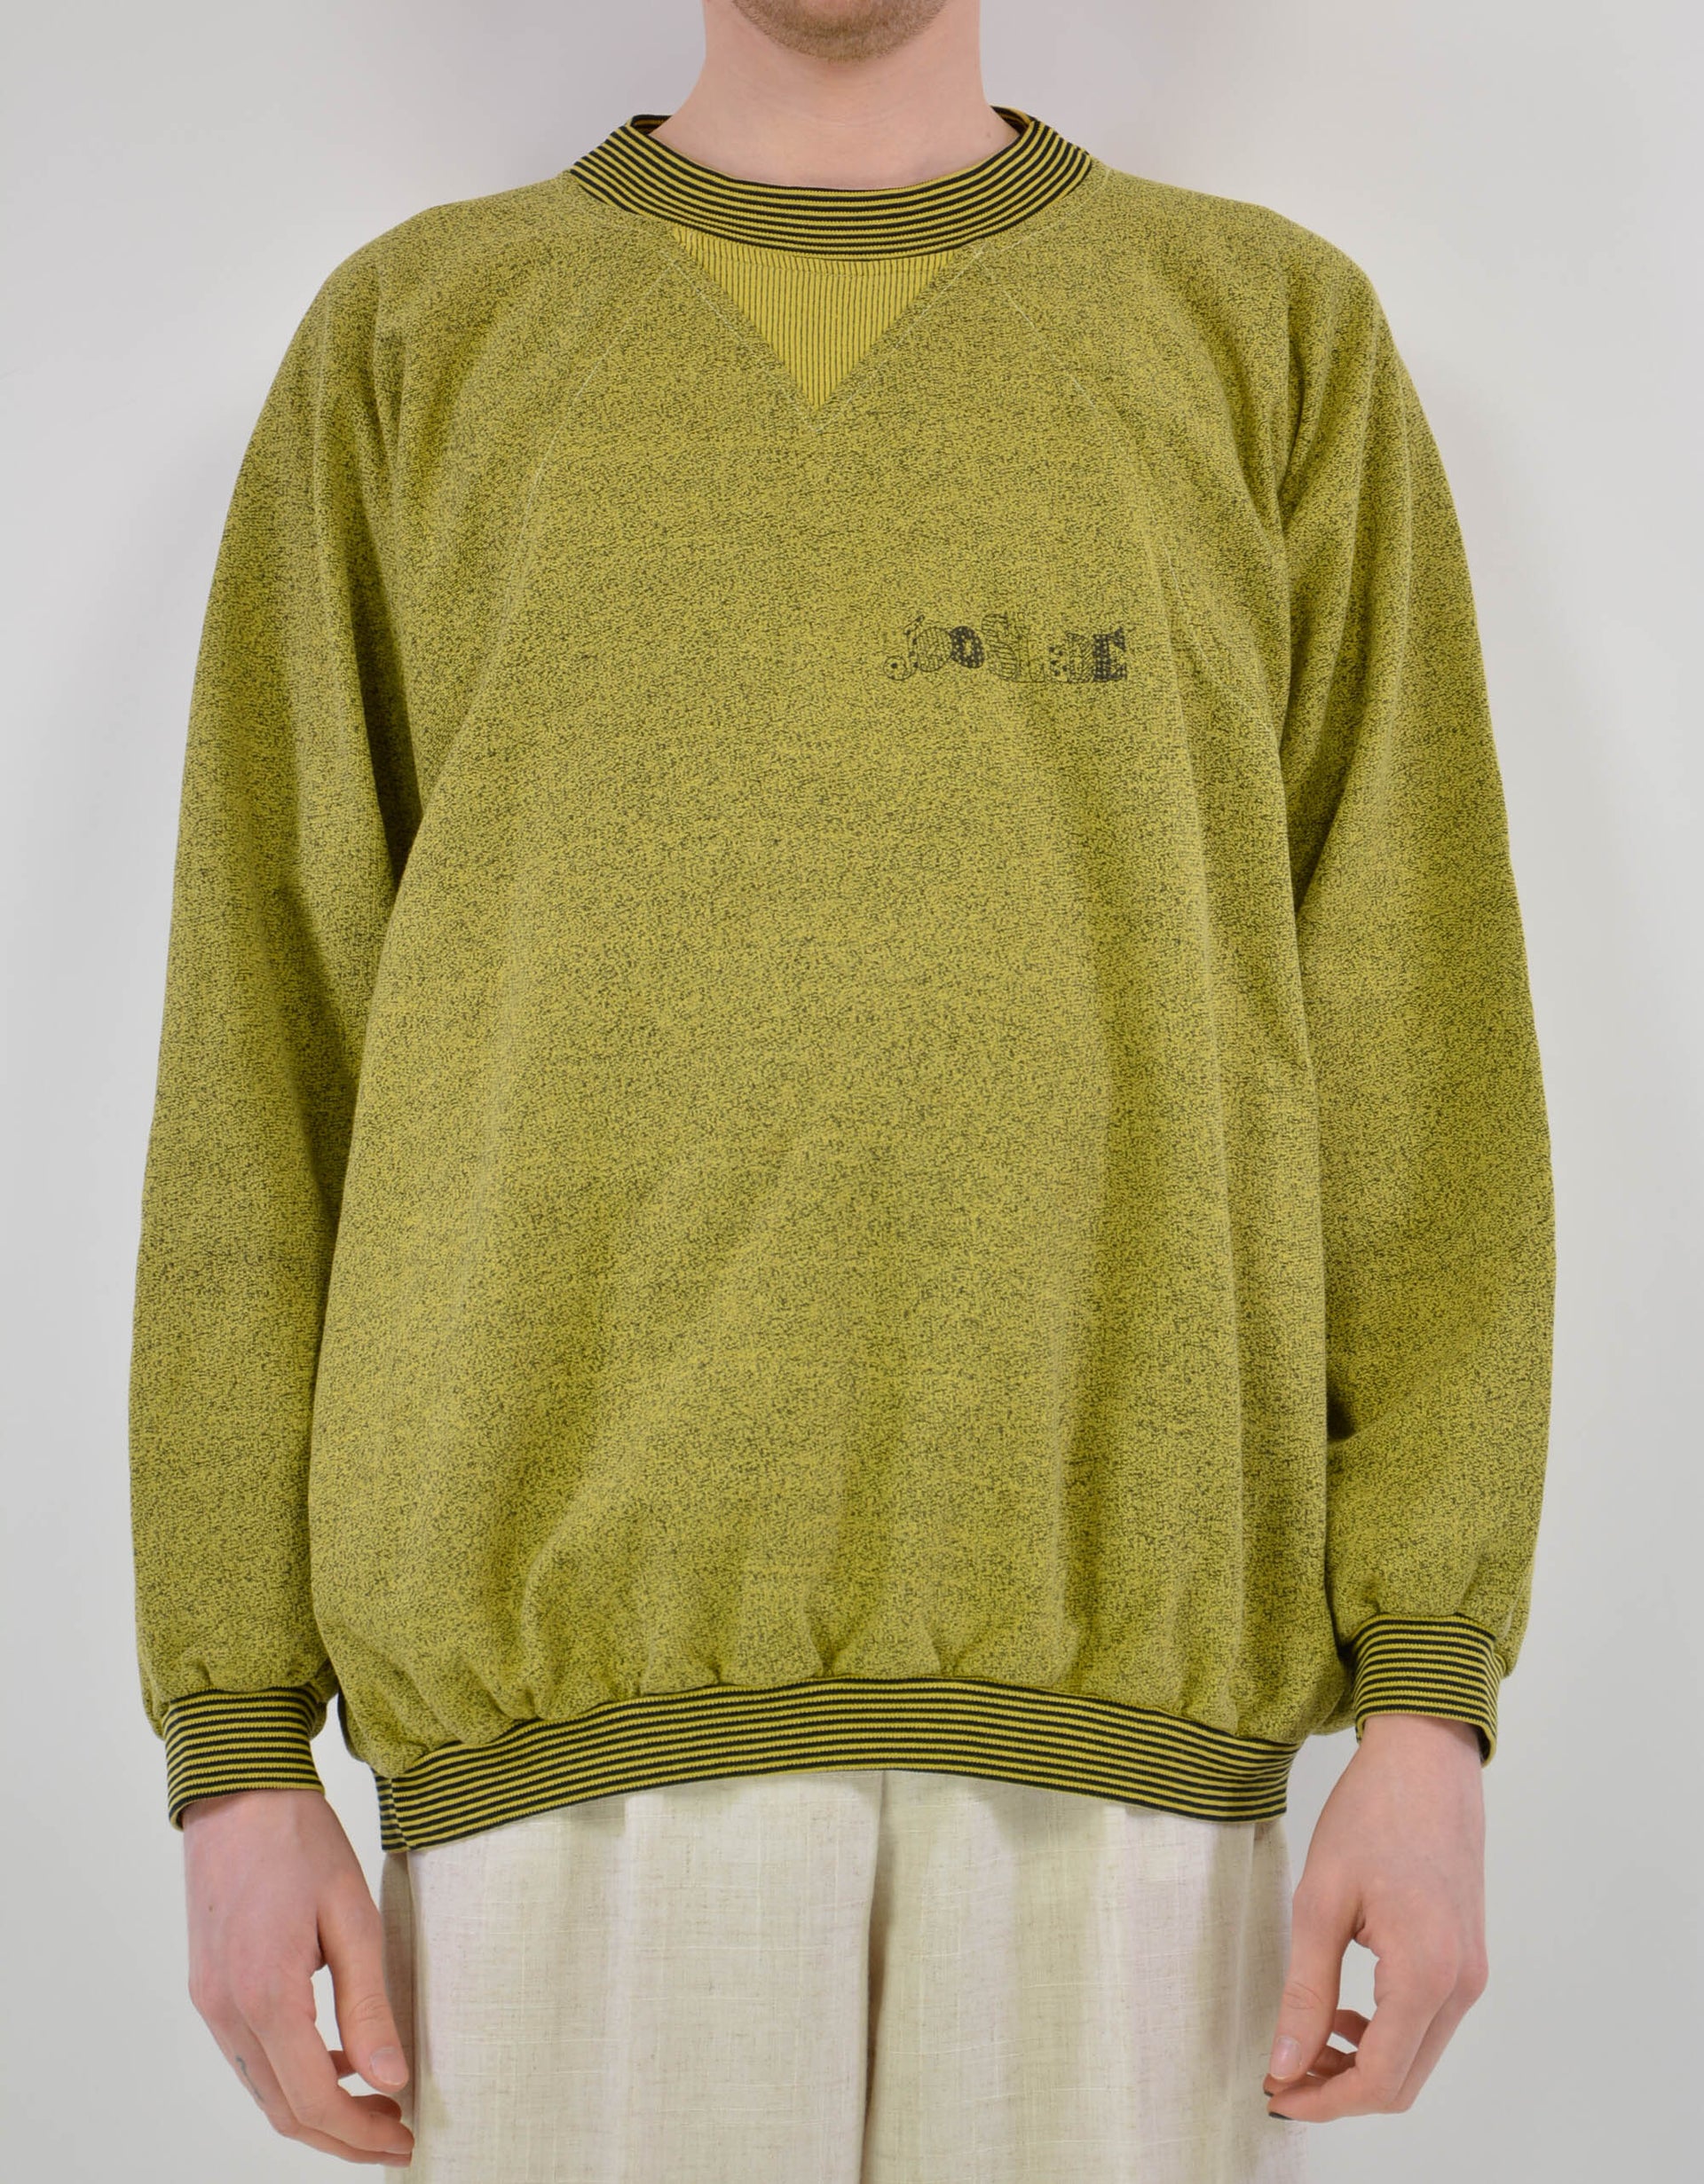 70s sweater - PICKNWEIGHT - VINTAGE KILO STORE